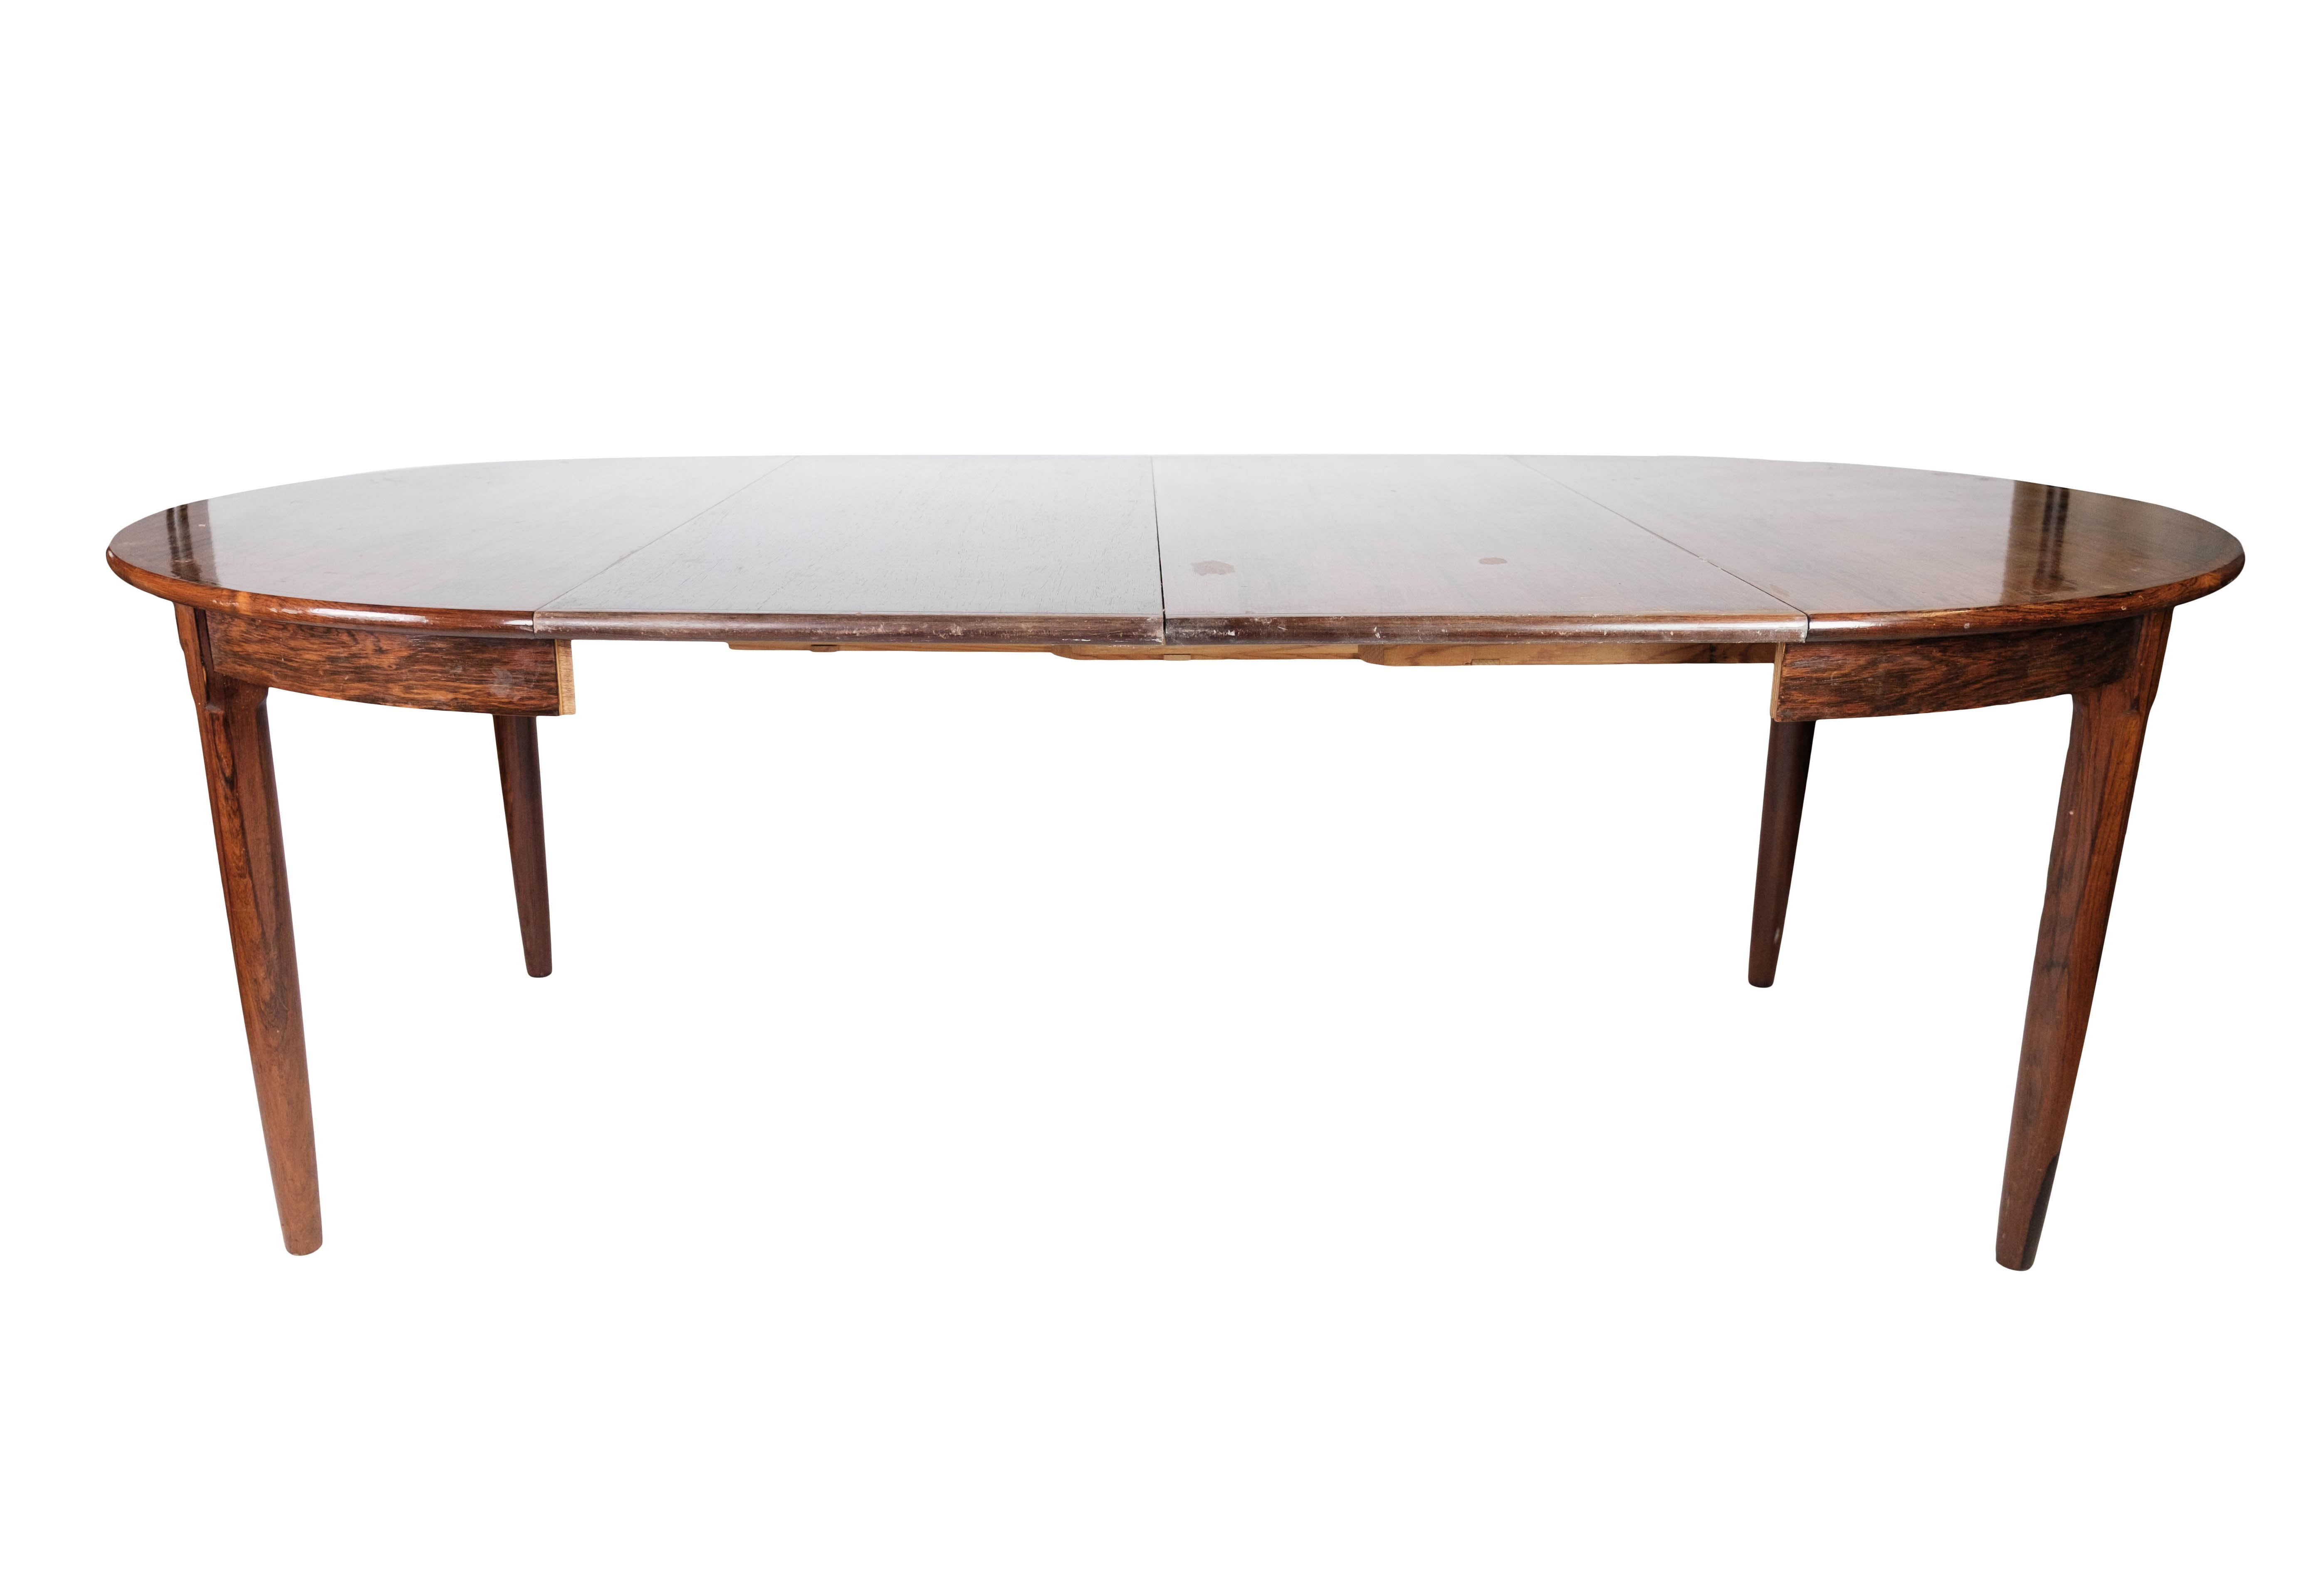 Dining Table Made In Rosewood With Extension, Danish Design From 1960s For Sale 11